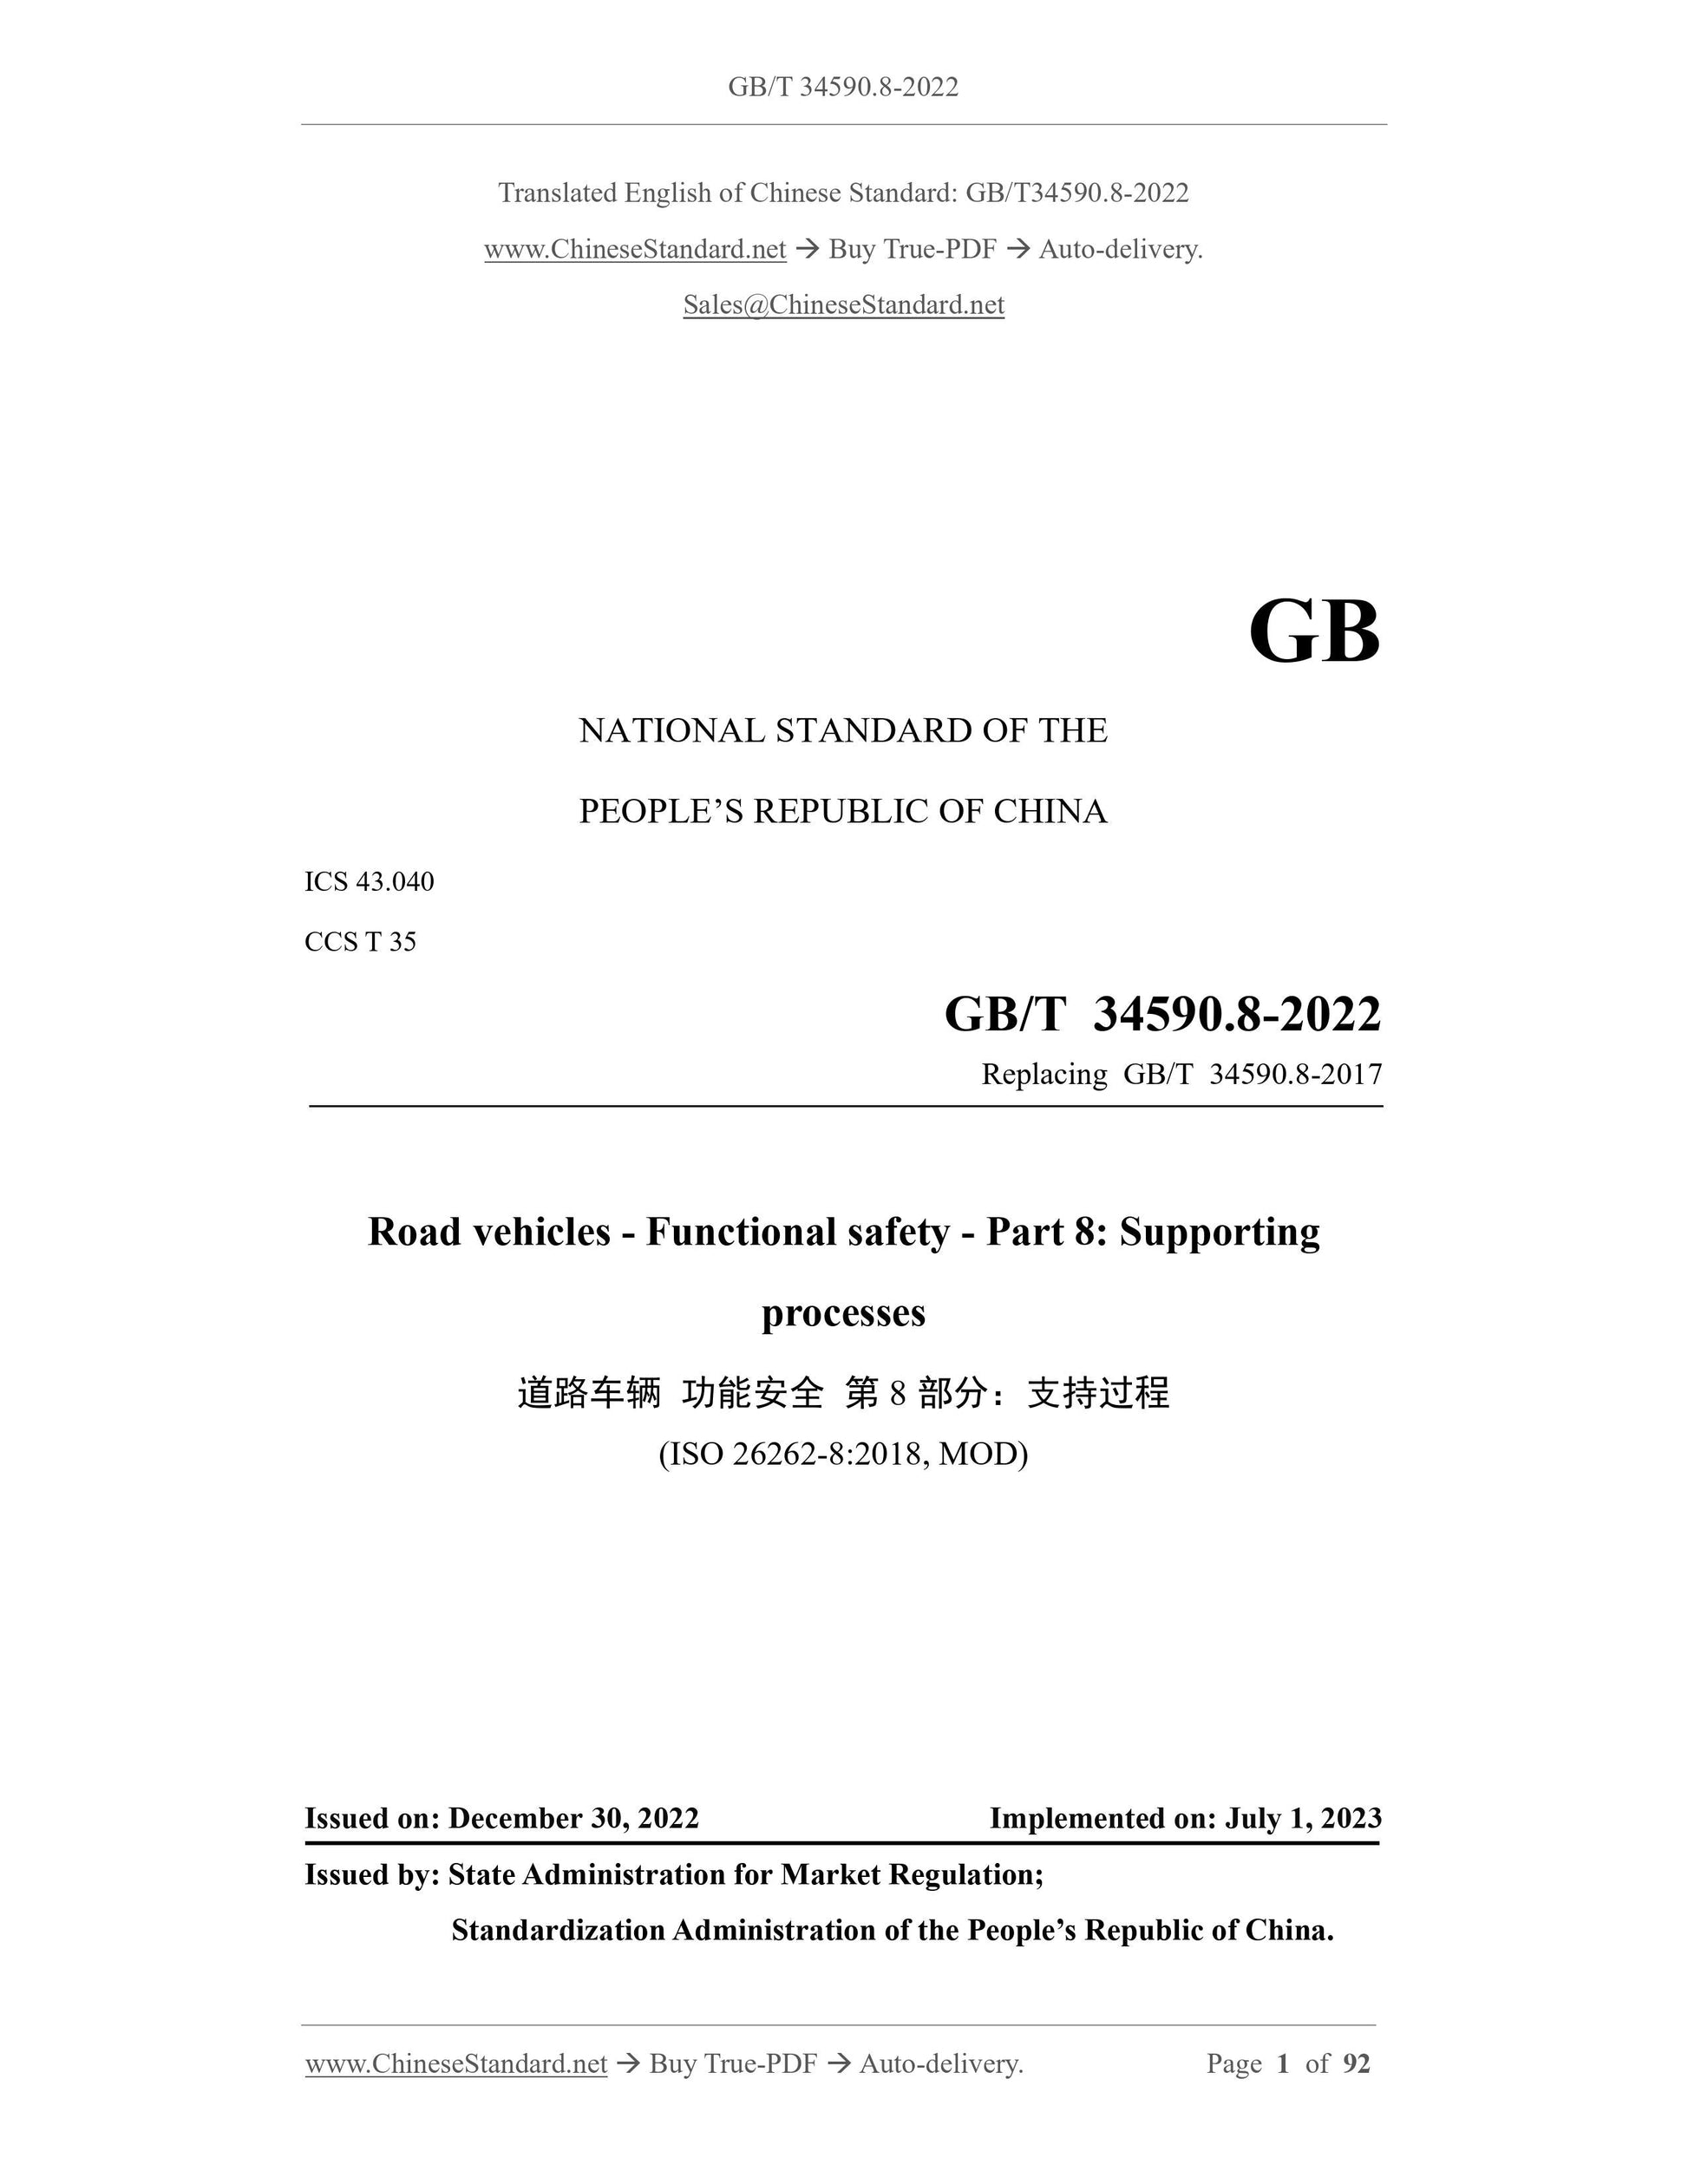 GB/T 34590.8-2022 Page 1